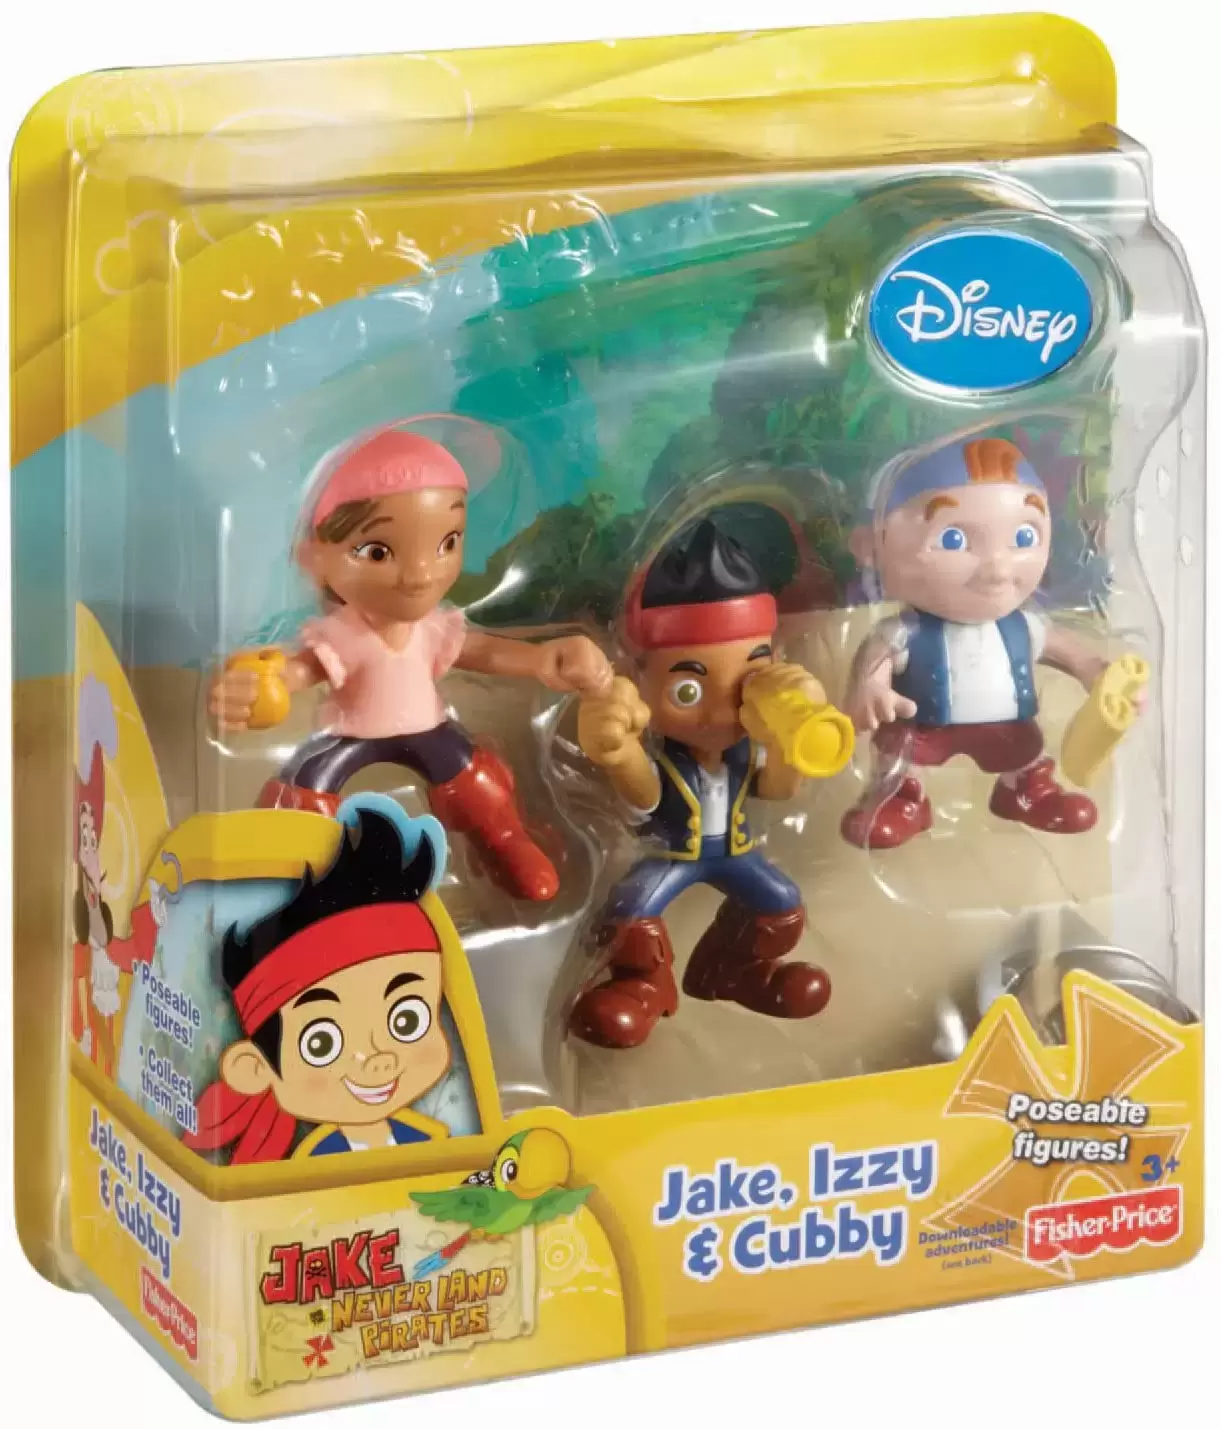 Jake et les Pirates - Fisher Price - Jake, Izzy & Cubby